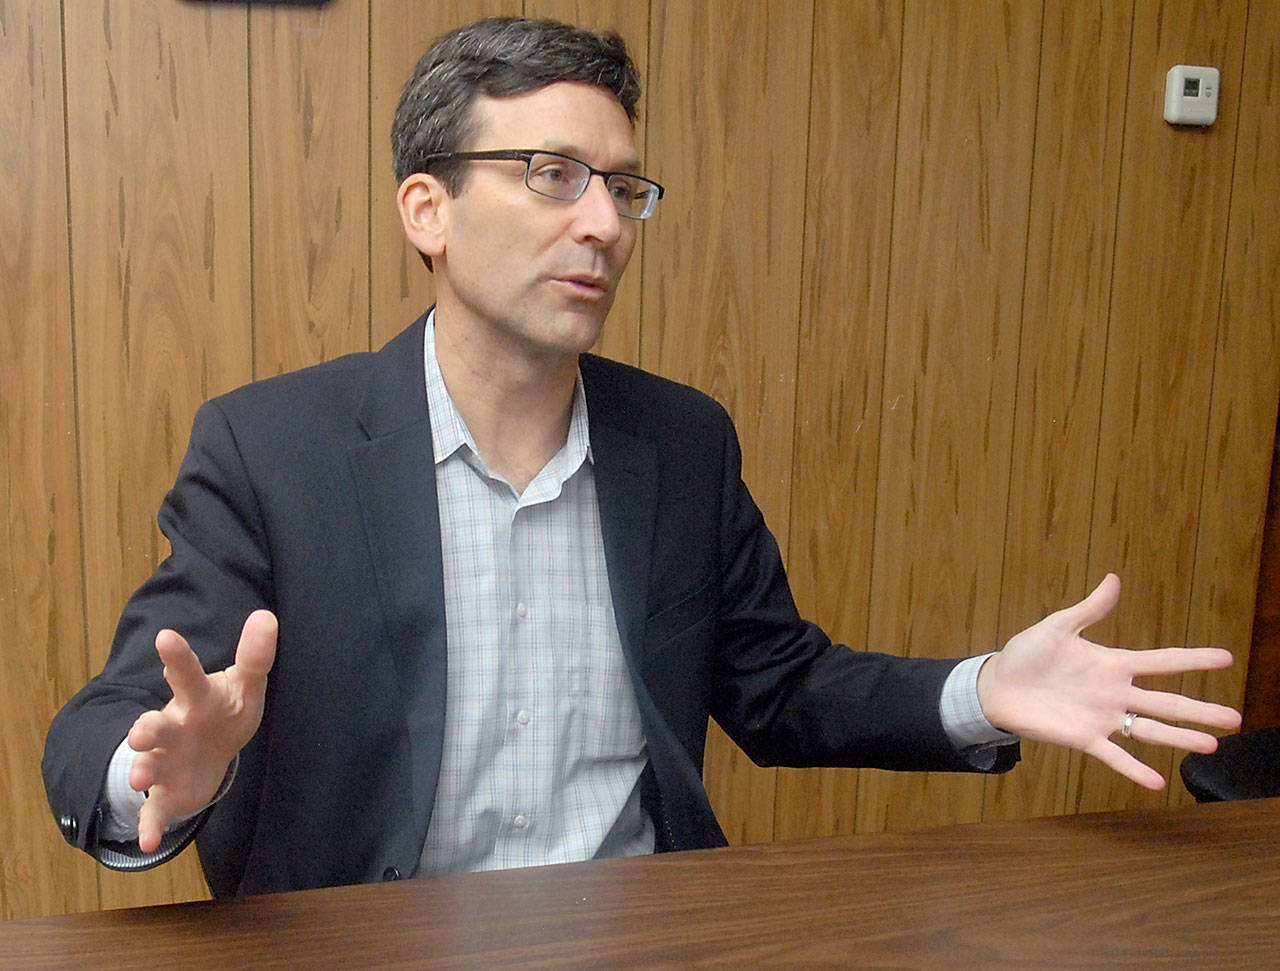 Washington Attorney General Bob Ferguson speaks about the opioid crisis during a visit to Port Angeles on Friday. (Keith Thorpe/Peninsula Daily News)